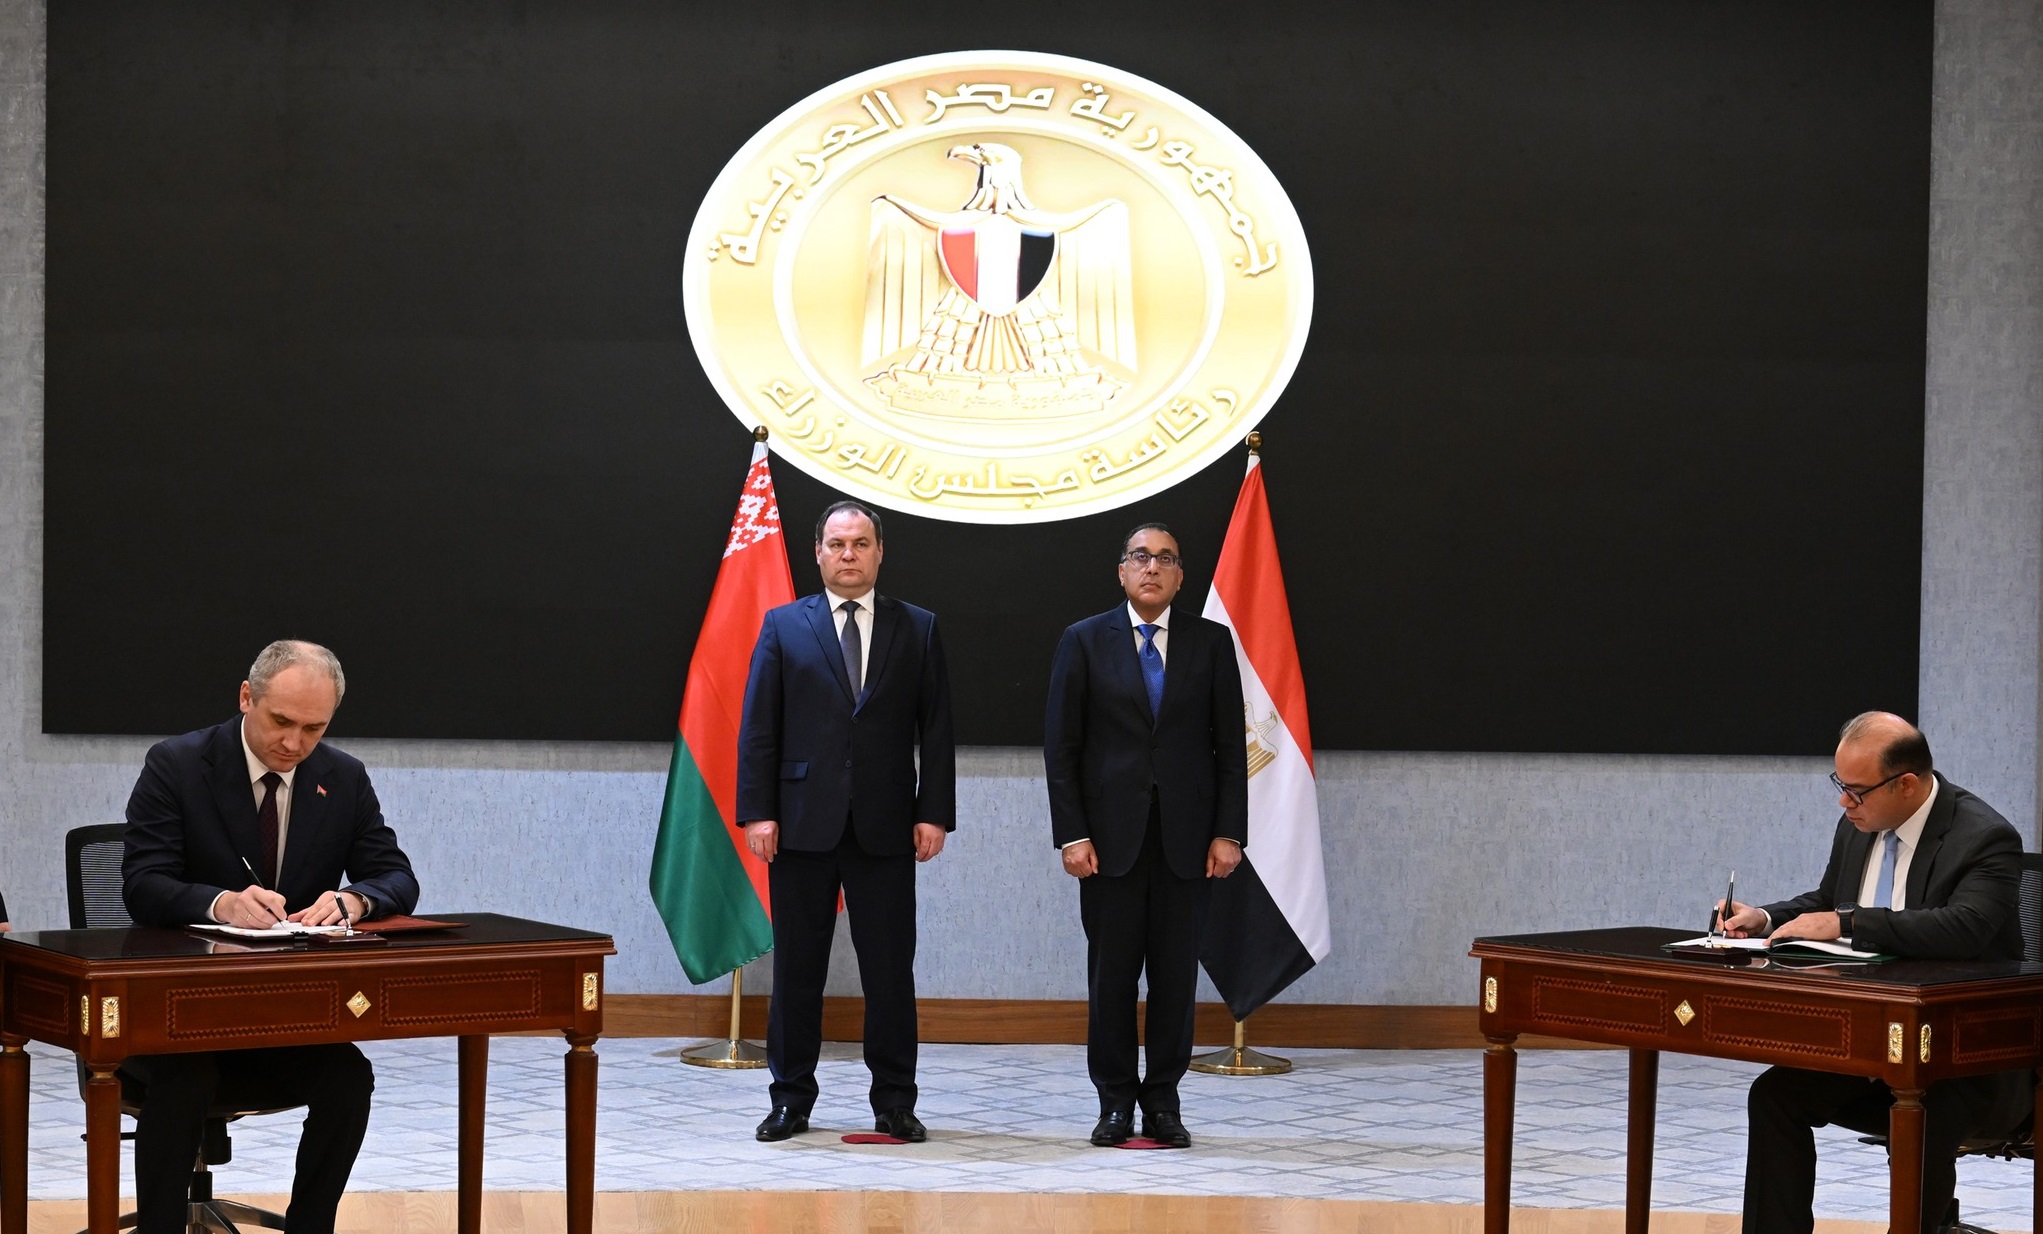 Egypt, Belarus ink MoU to foster investor participation in securities markets

